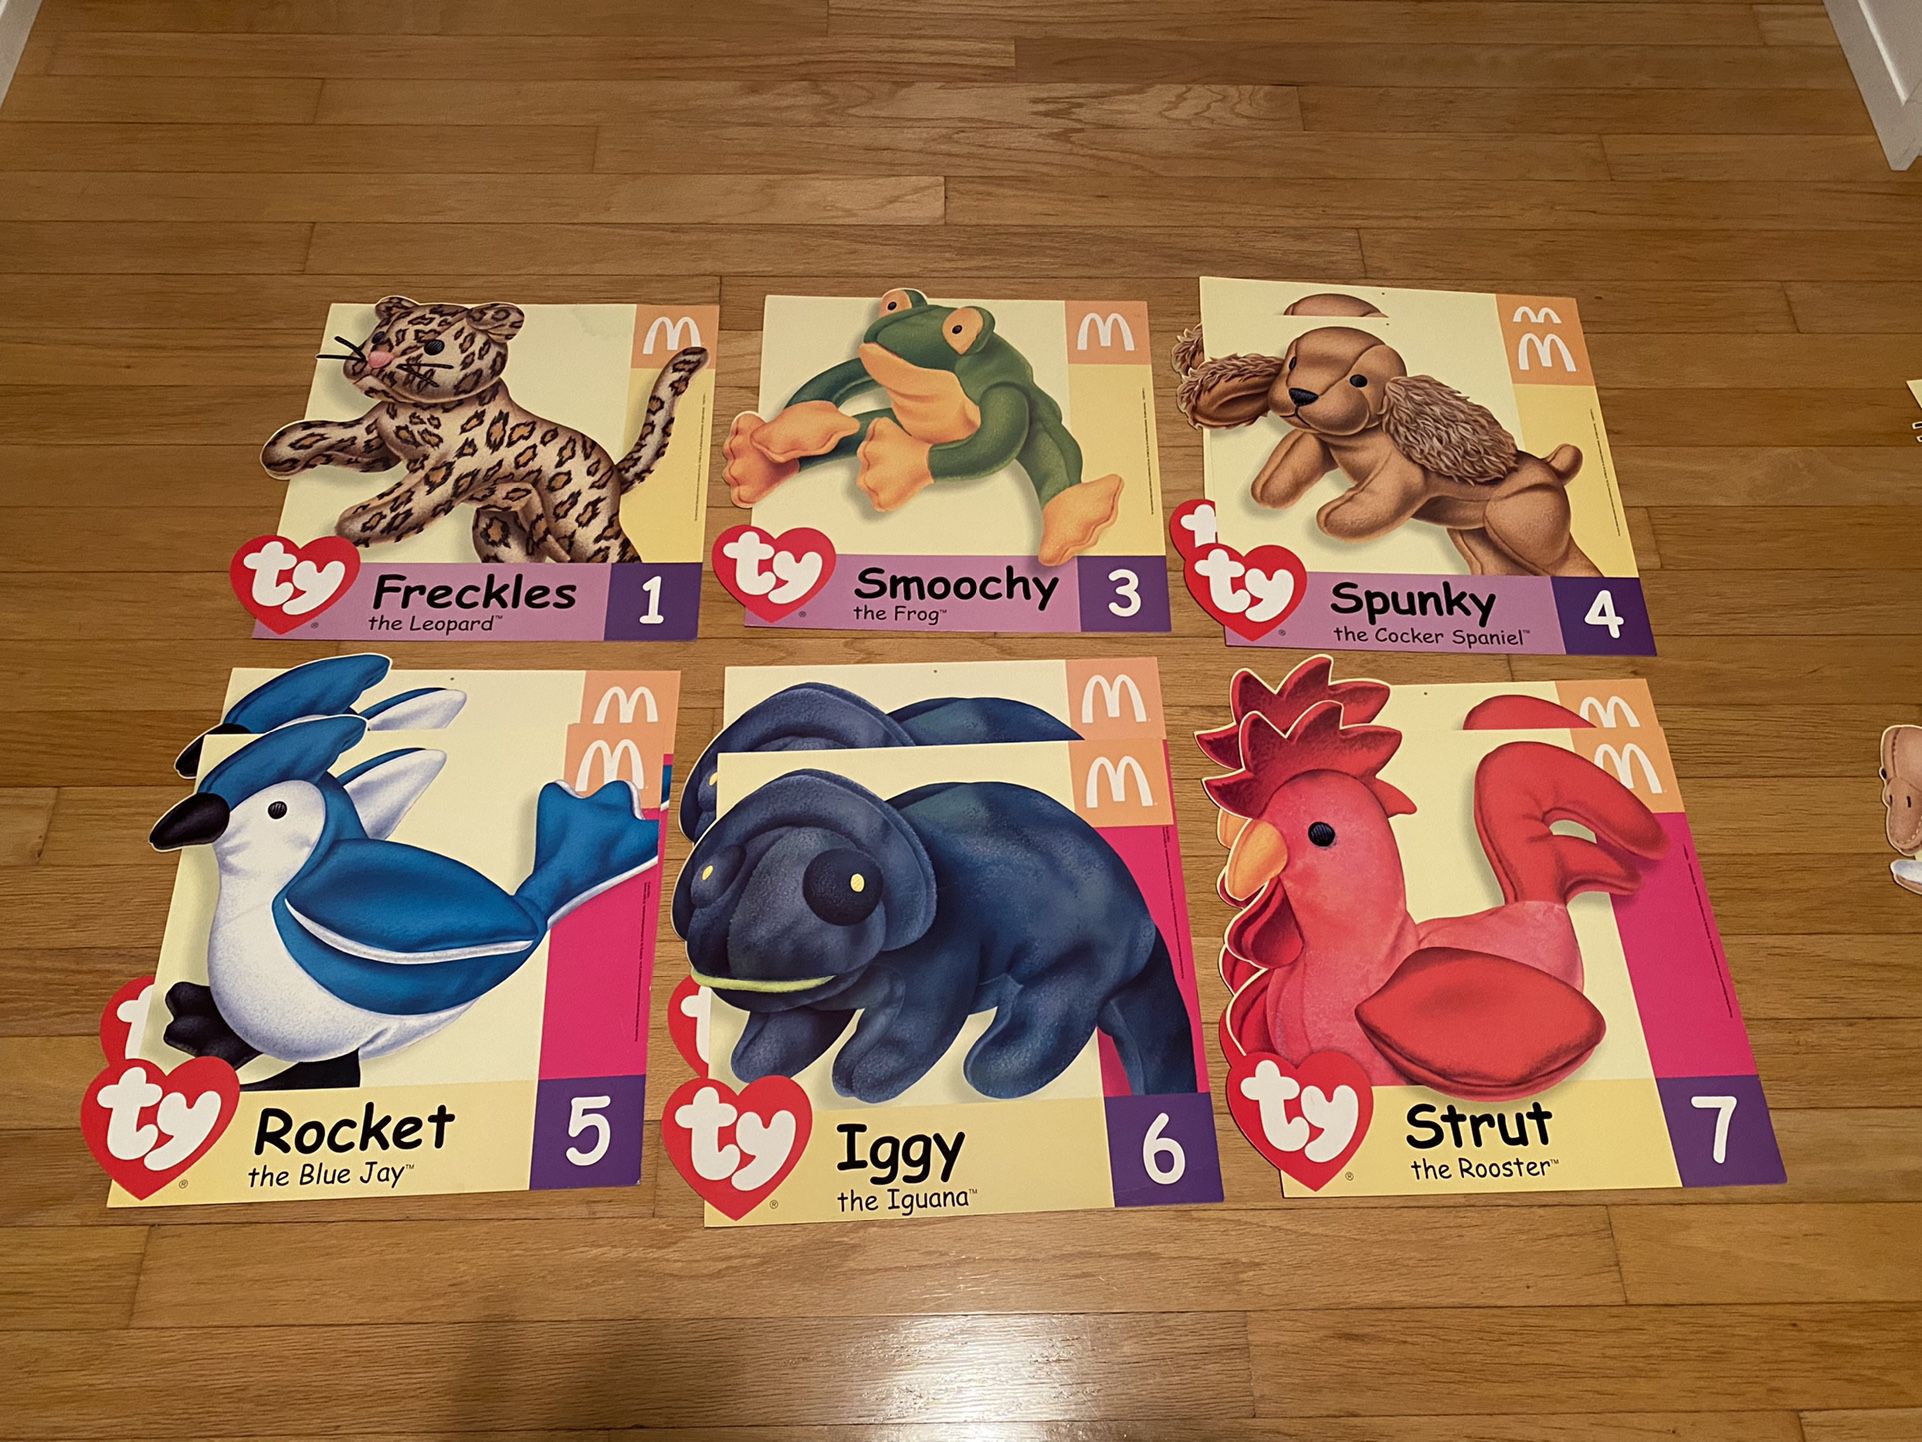 McDONALD'S Ty TEENIE BEANIE BABIES 1999 LOT OF 11 STORE POSTER DISPLAY SIGNS